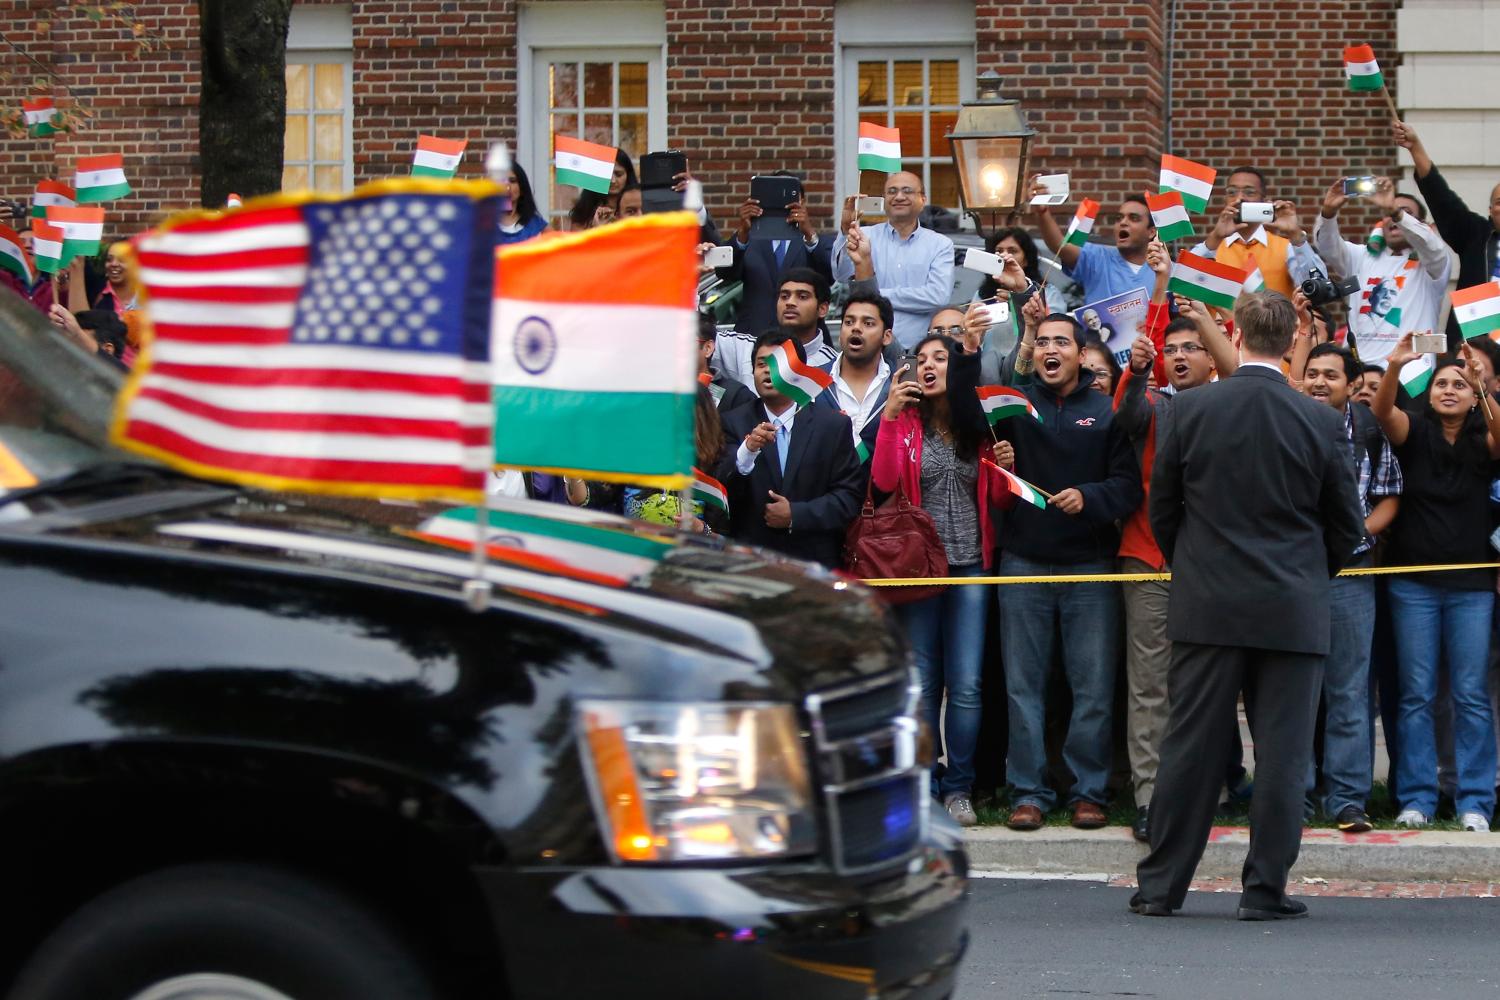 A crowd cheers as the motorcade carrying India's Prime Minister Narendra Modi arrives for him to pay homage at the Mahatma Gandhi Statue in front of the Indian Embassy in Washington September 30, 2014. U.S. President Barack Obama and Modi vowed on Monday to expand and deepen their countries' strategic partnership and make it a model for the rest of the world. REUTERS/Jonathan Ernst  (UNITED STATES - Tags: POLITICS)